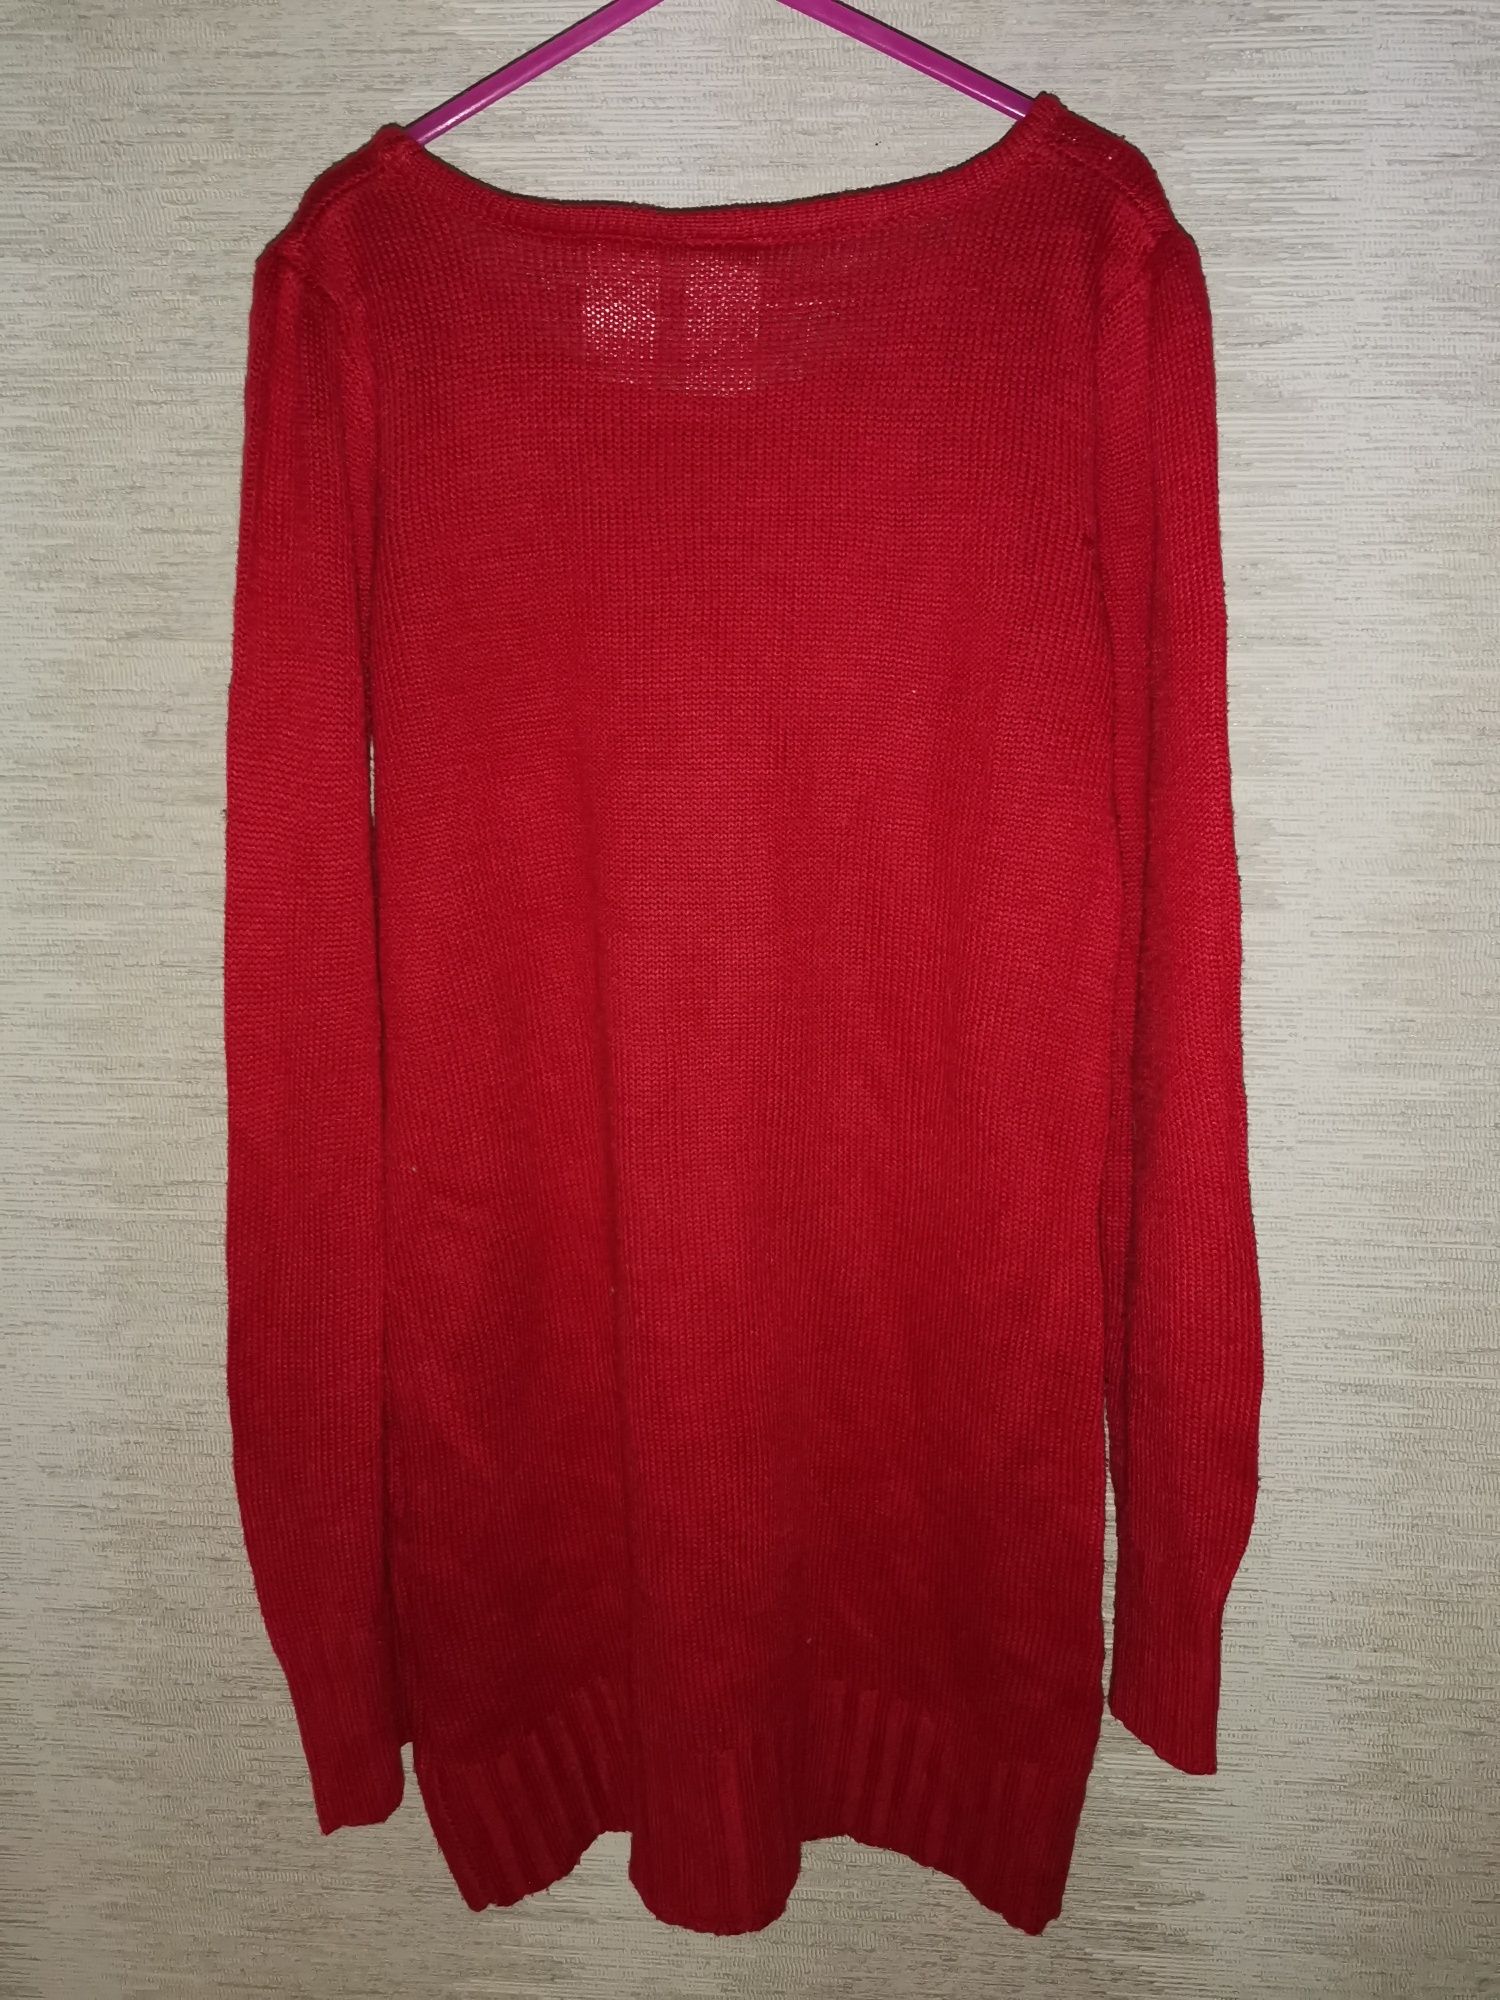 Guess sweter r. 10-12 lat